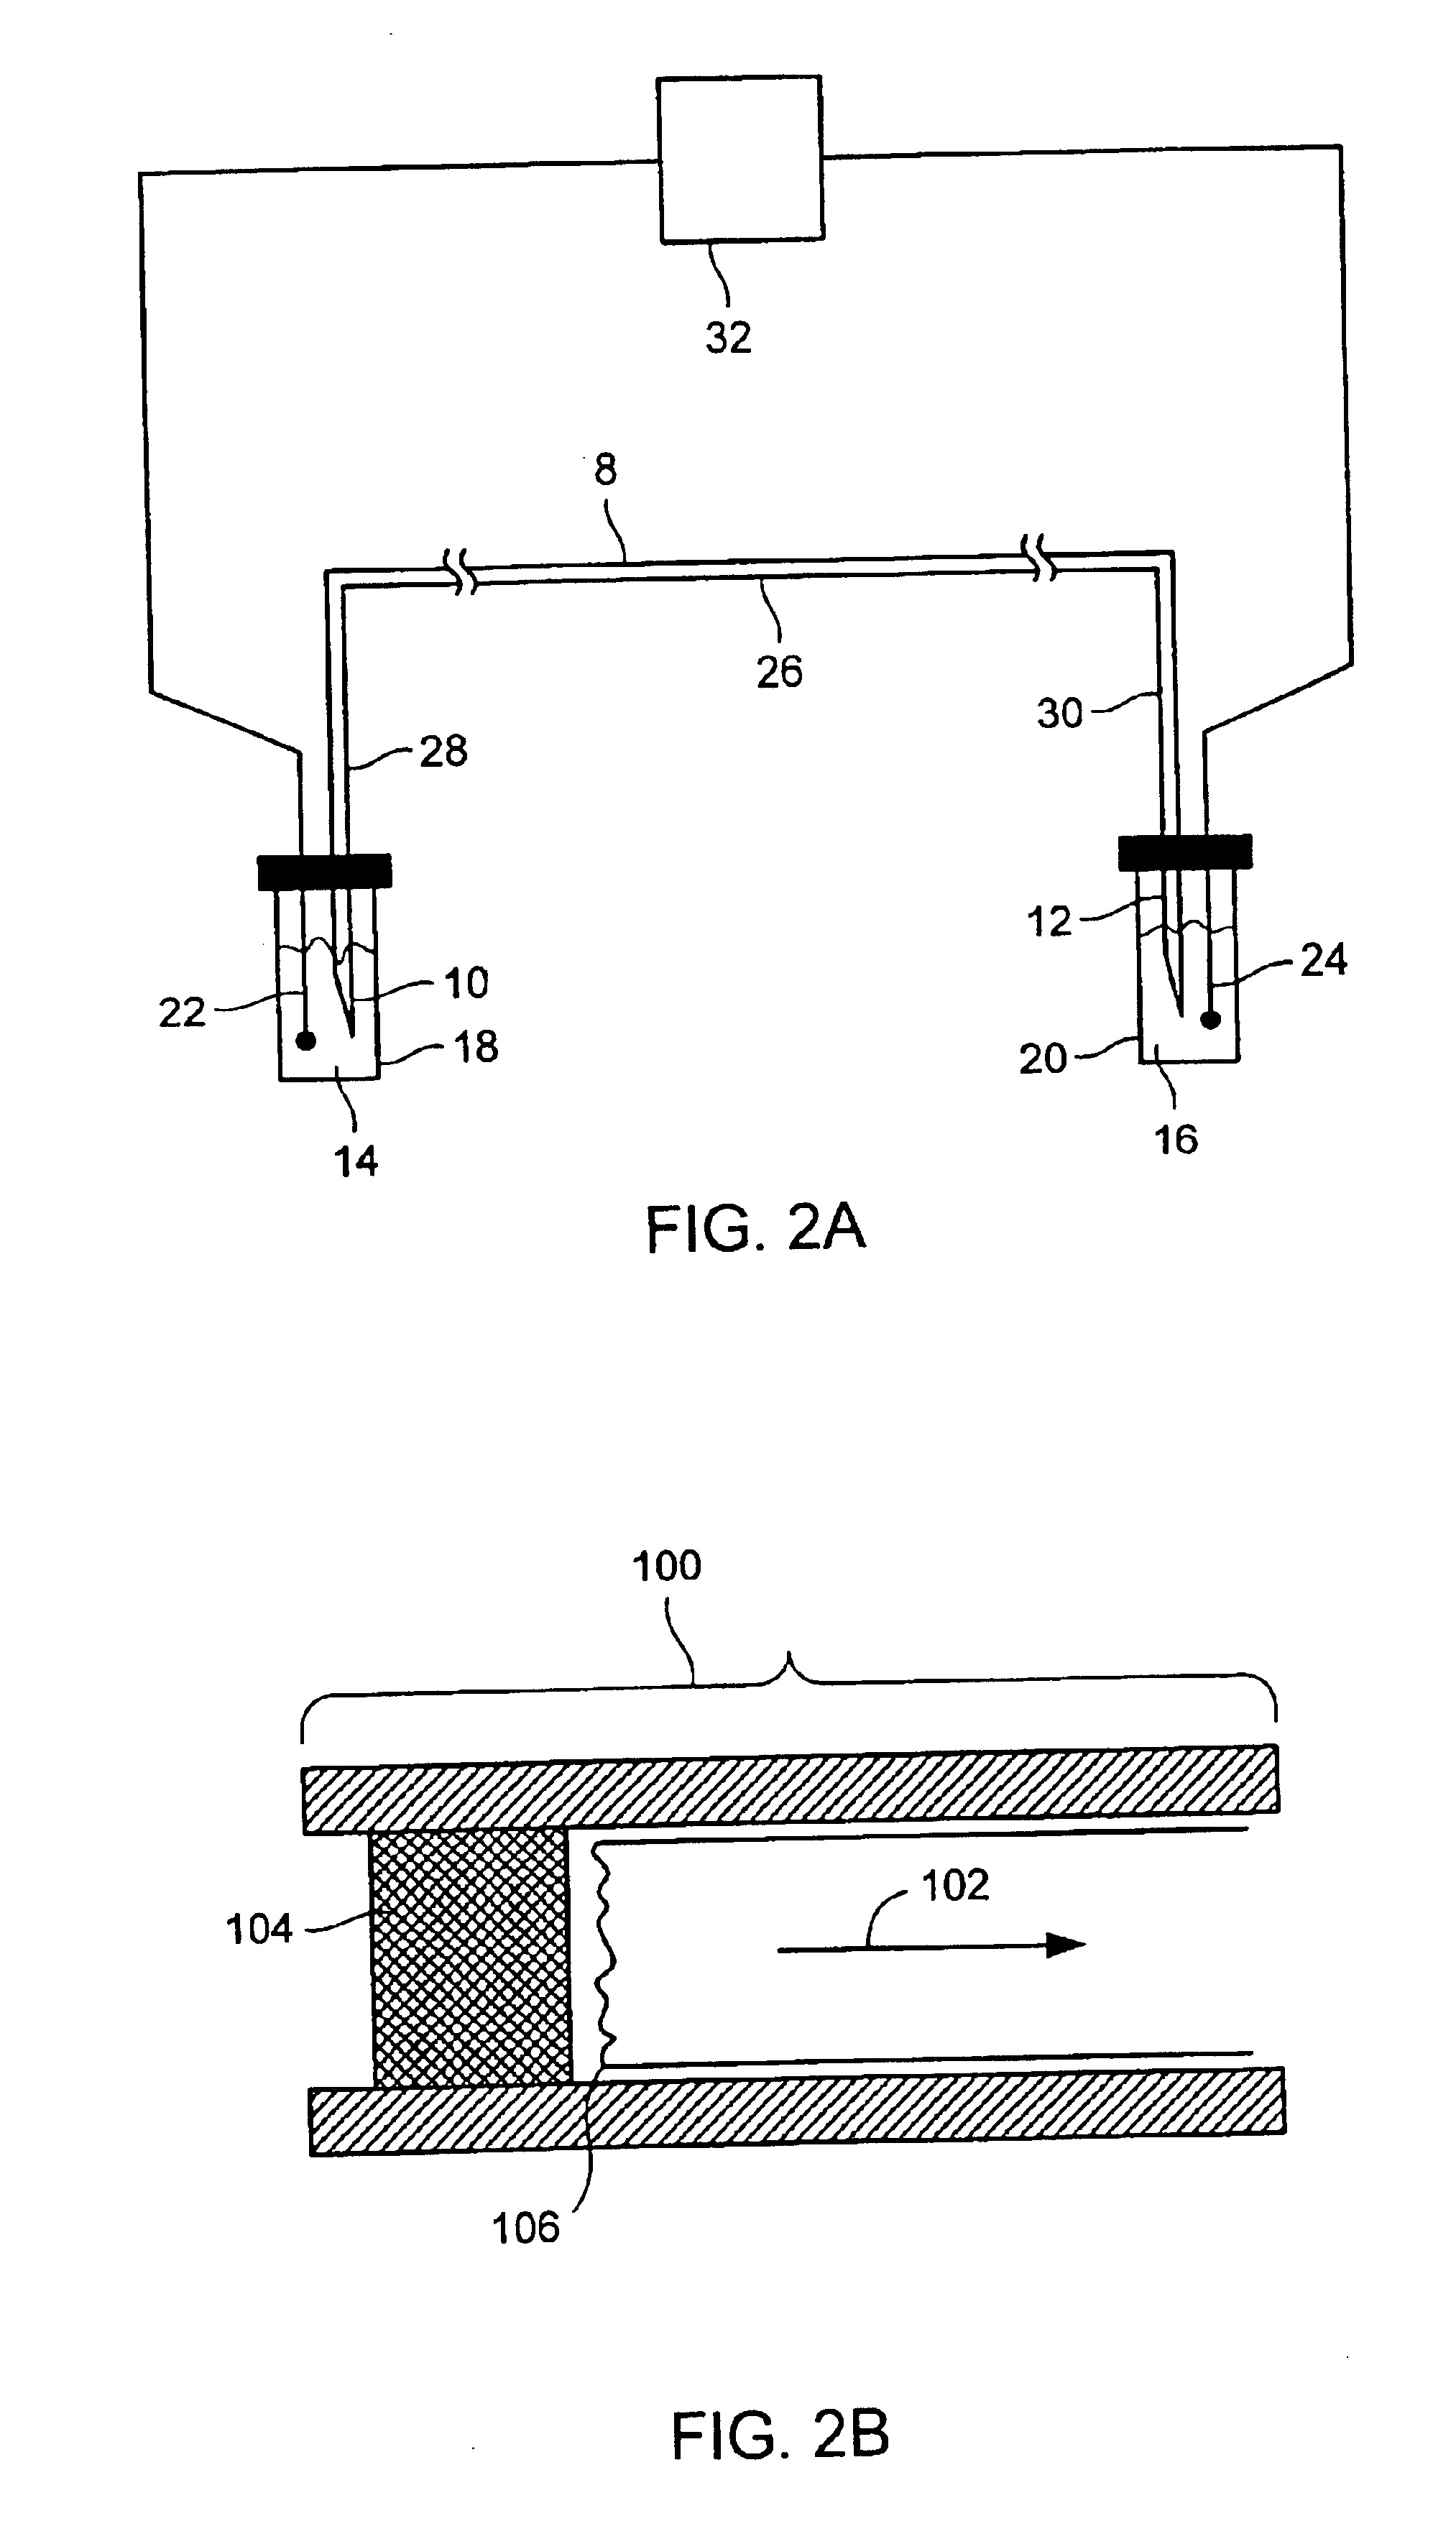 Methods for conducting metabolic analyses